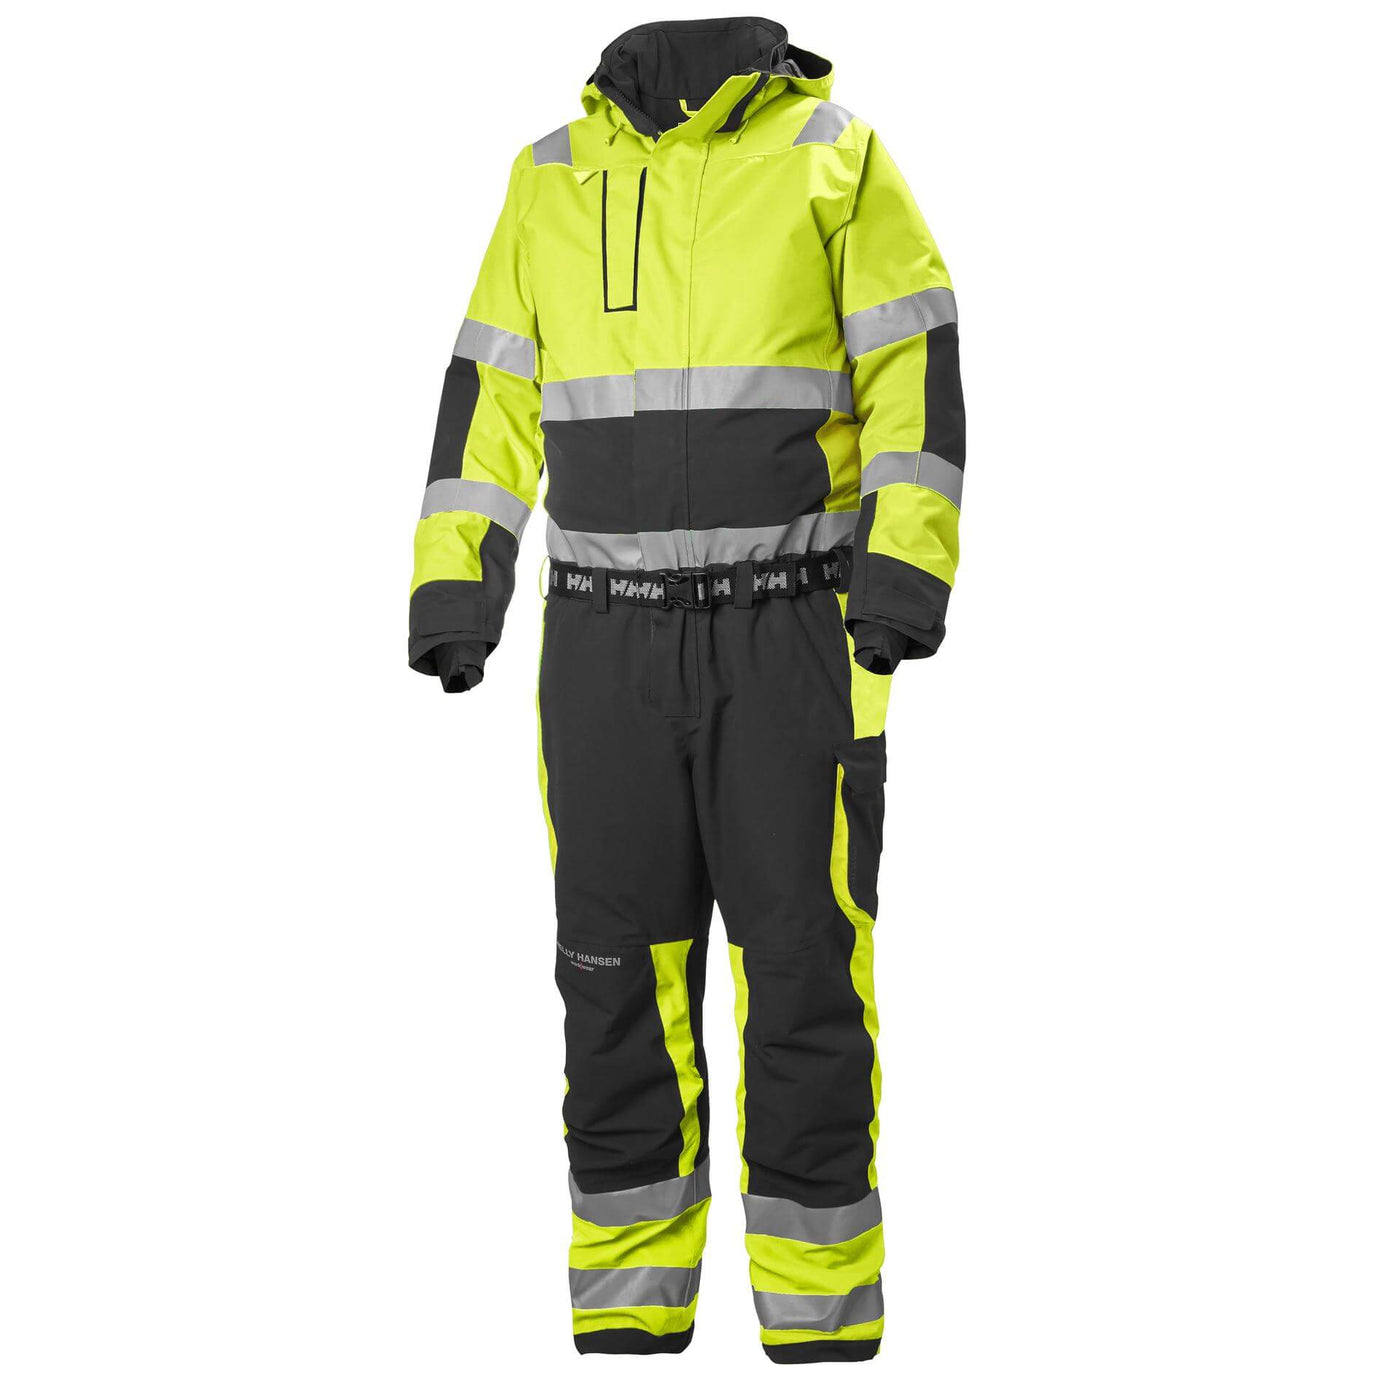 Helly Hansen Alna 2.0 Hi Vis Insulated Winter Overalls Suit Yellow 1 Front #colour_yellow